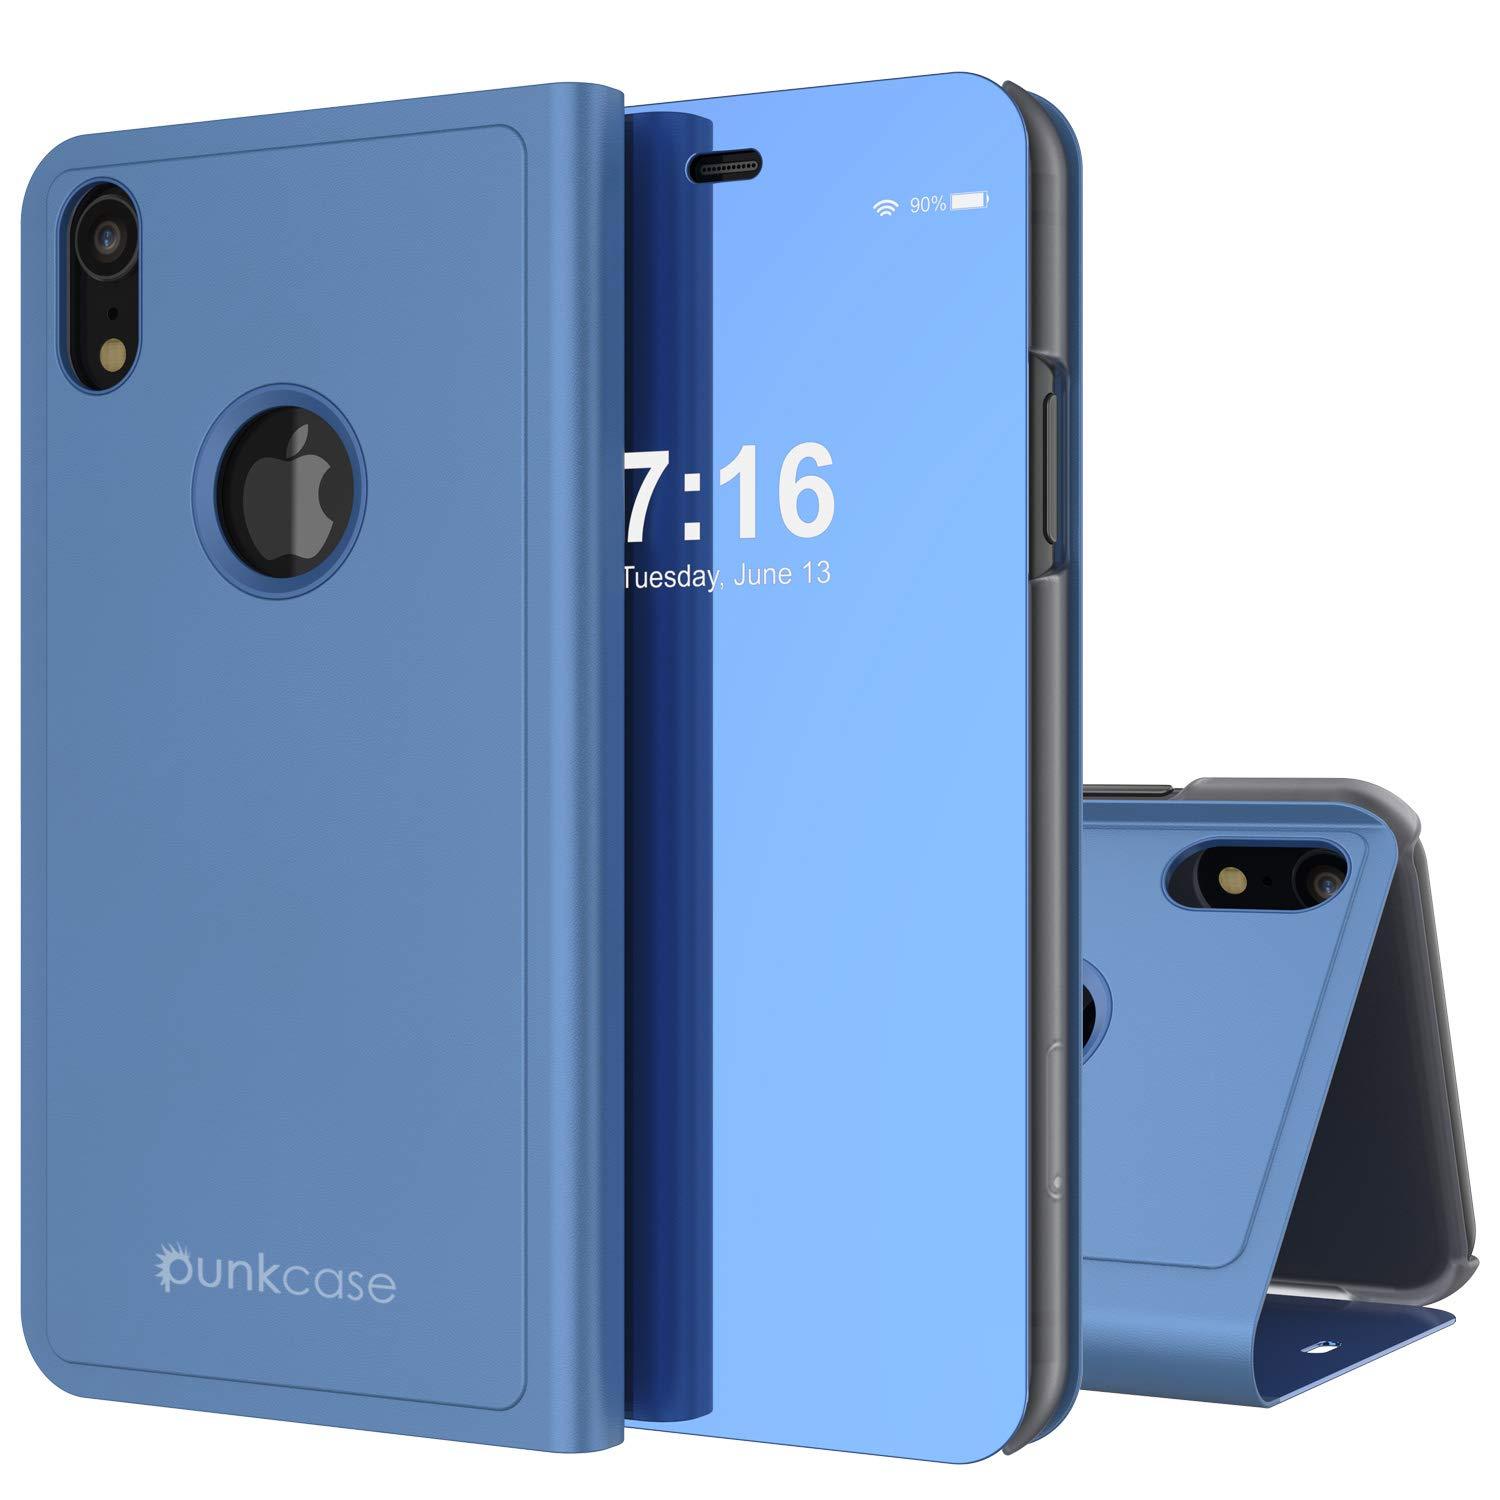 Punkcase iPhone XR Reflector Case Protective Flip Cover [Blue]